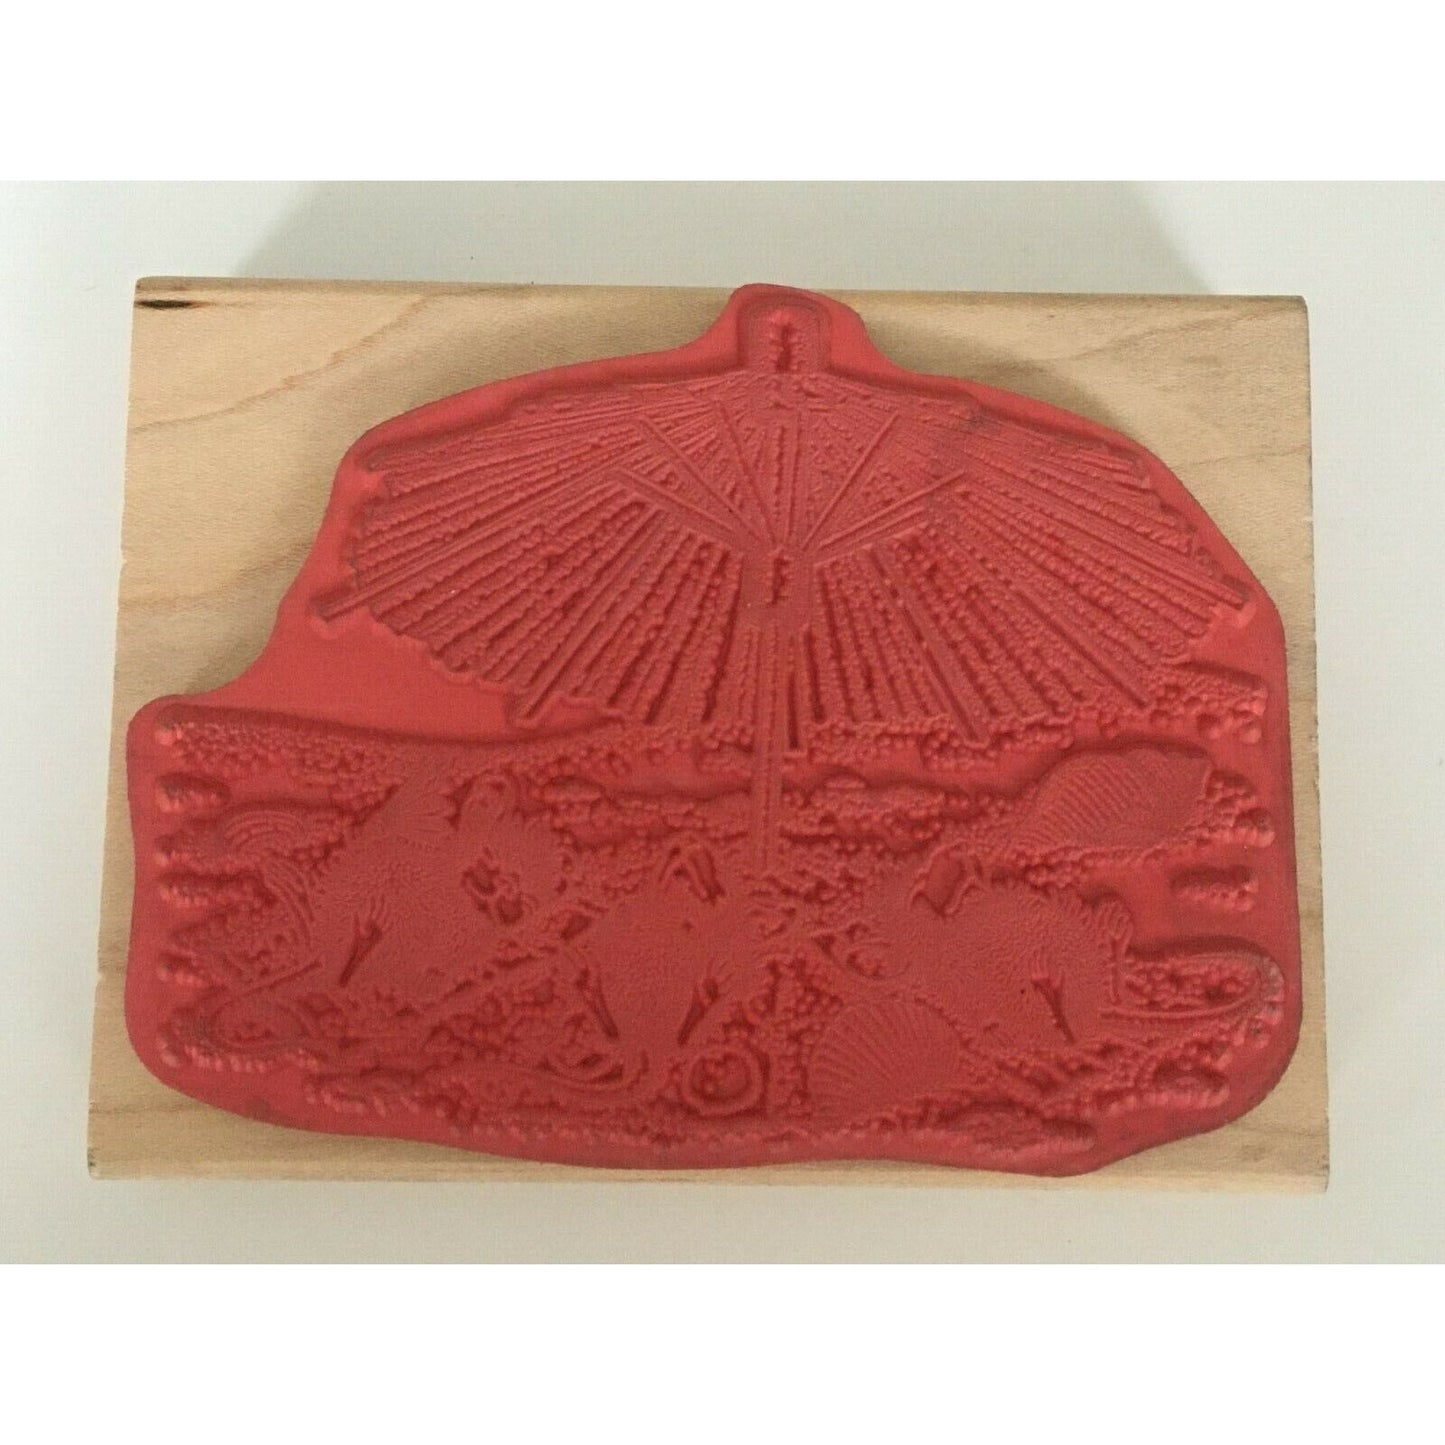 Stampabilities Rubber Stamp House Mouse Beach Bums Amanda Muzzy Mudpie Umbrella